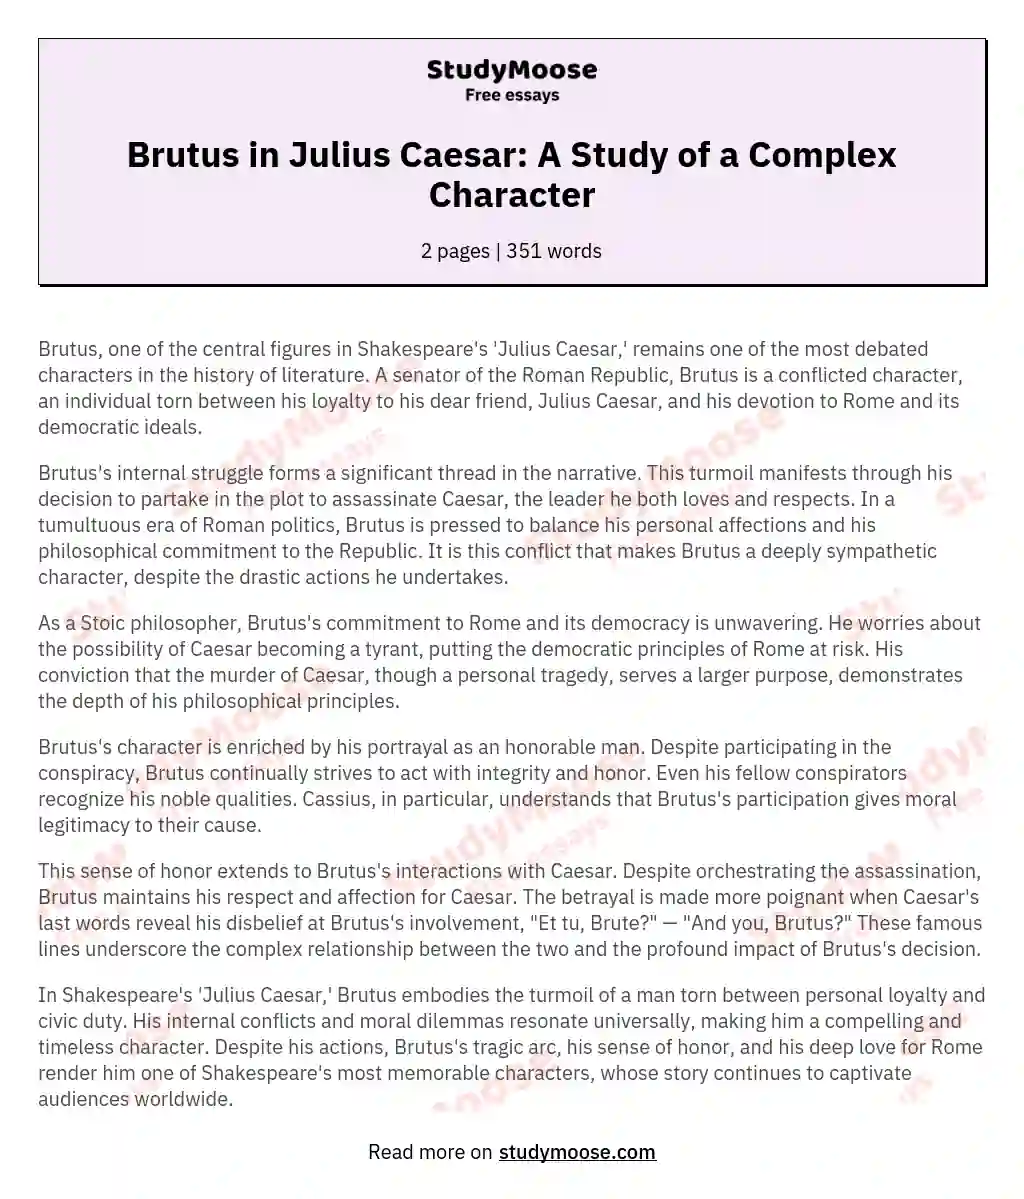 Brutus in Julius Caesar: A Study of a Complex Character essay